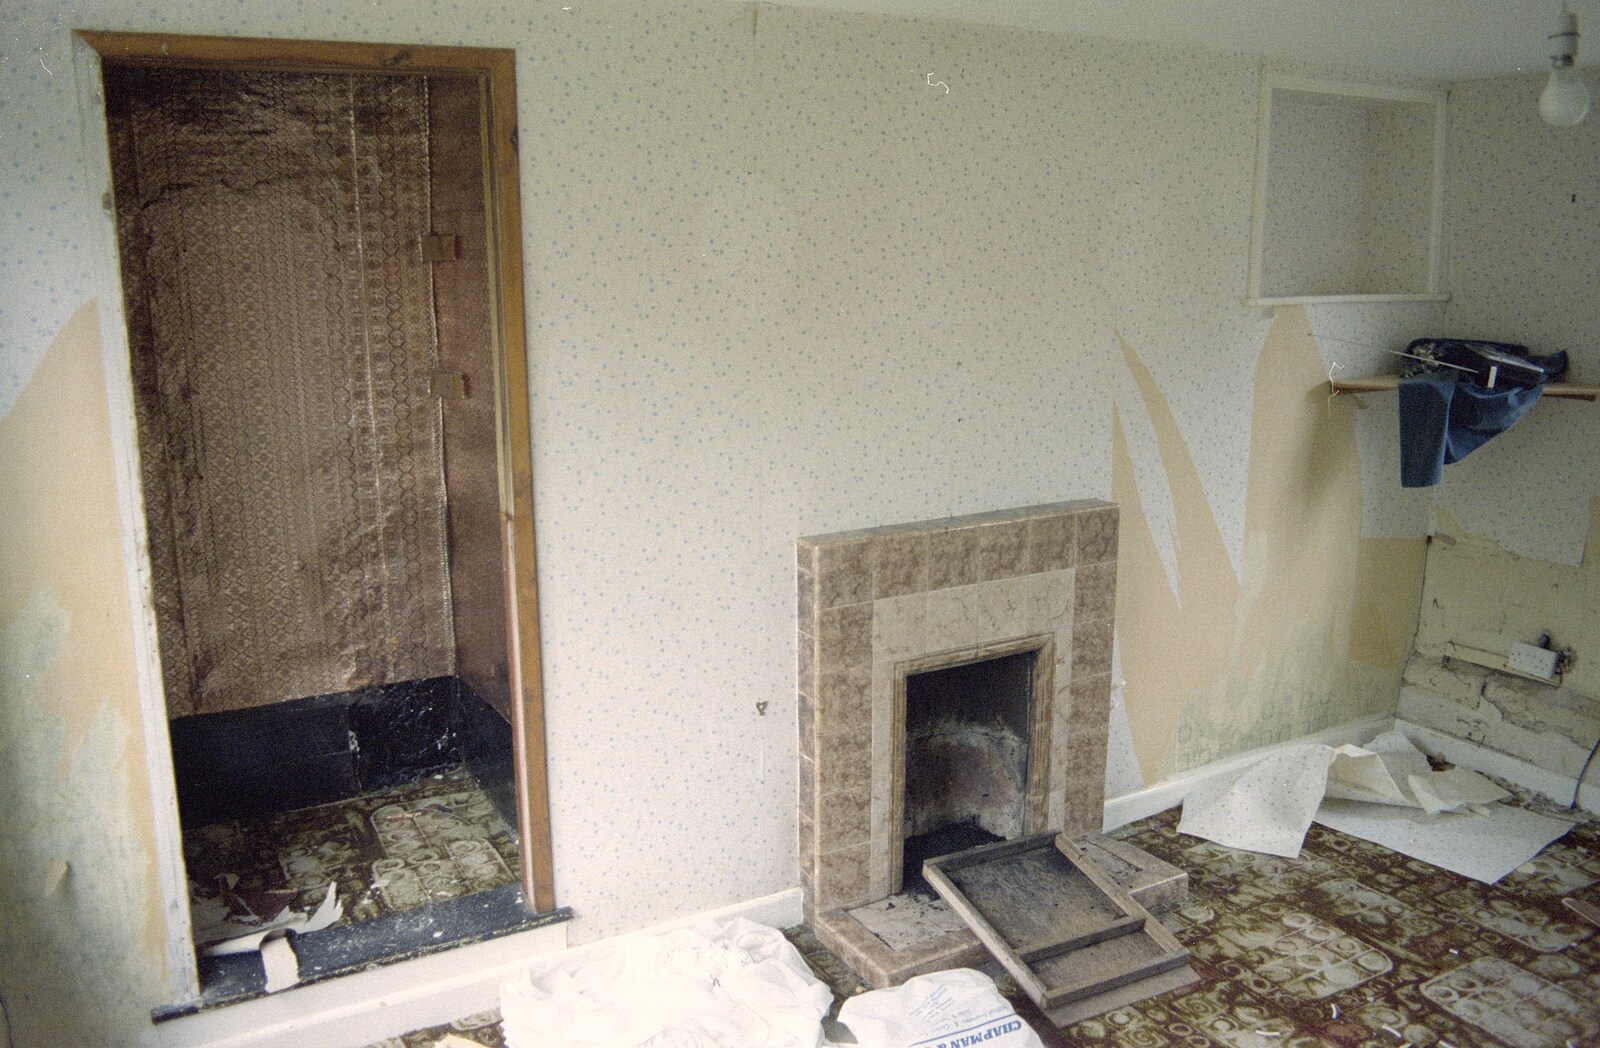 The gold lamé wallpaper in the 'bar' from Moving In, Brome, Suffolk - 10th April 1994